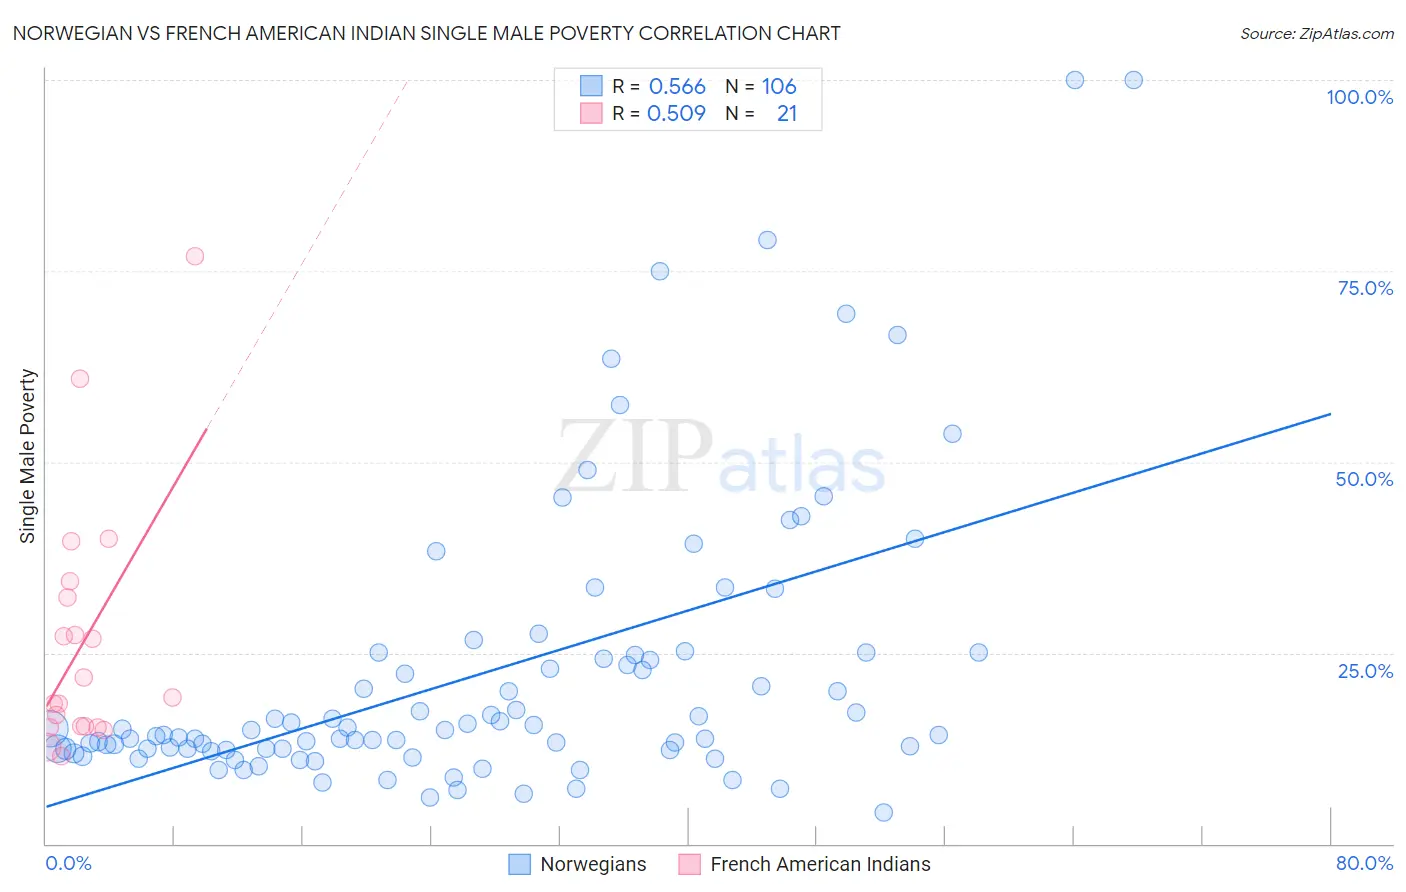 Norwegian vs French American Indian Single Male Poverty